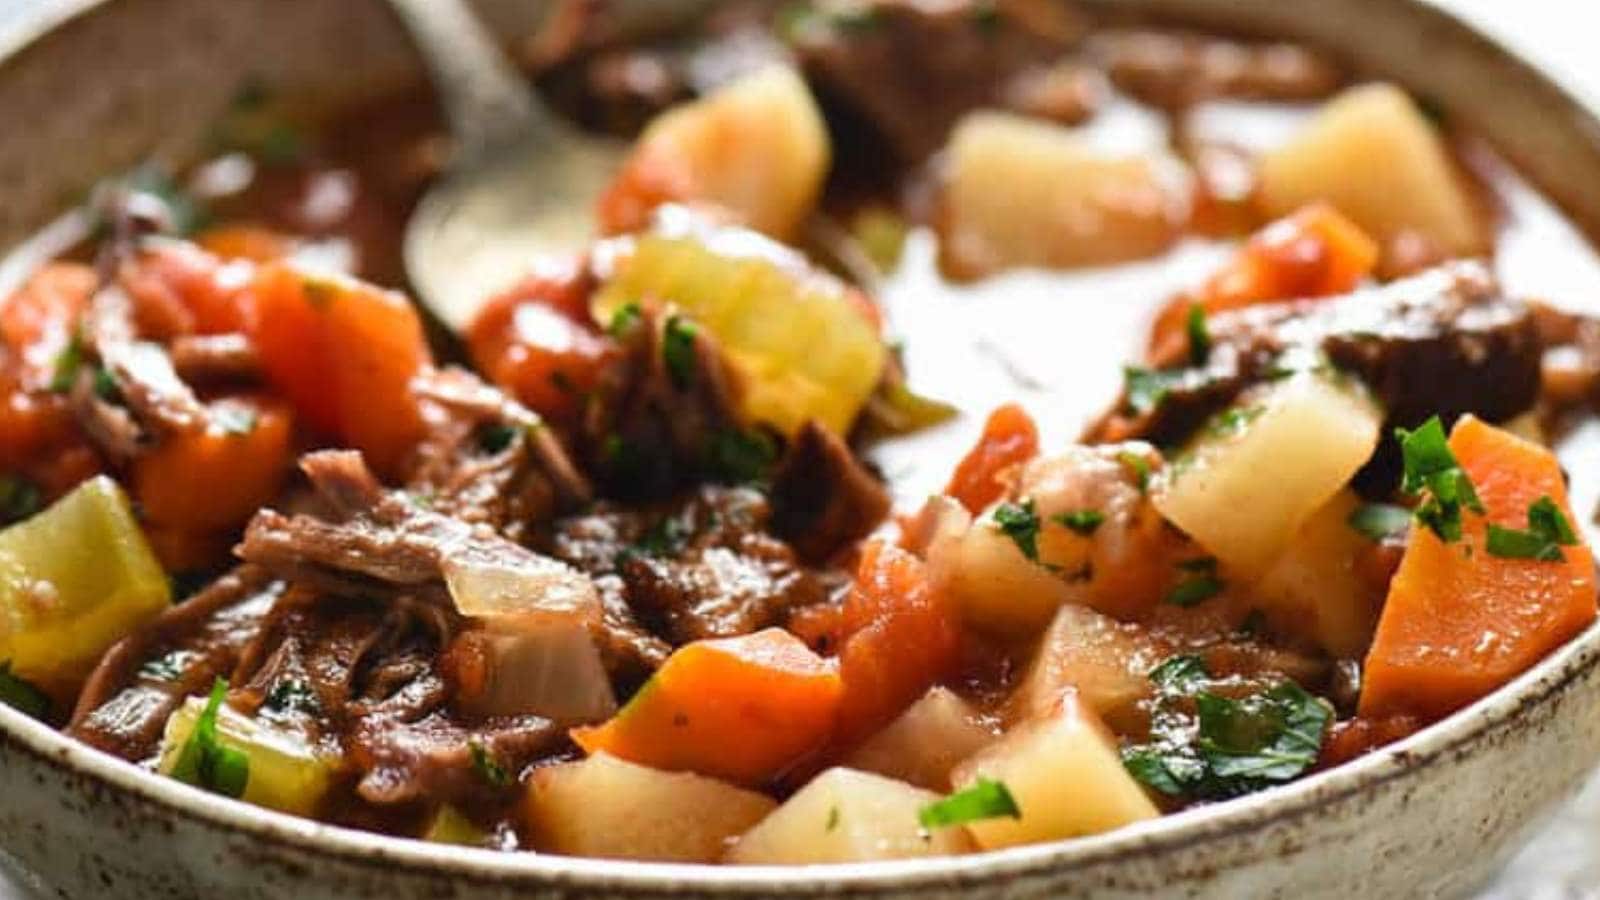 Slow Cooker Beef Vegetable Soup recipe by Foxes Love Lemons.